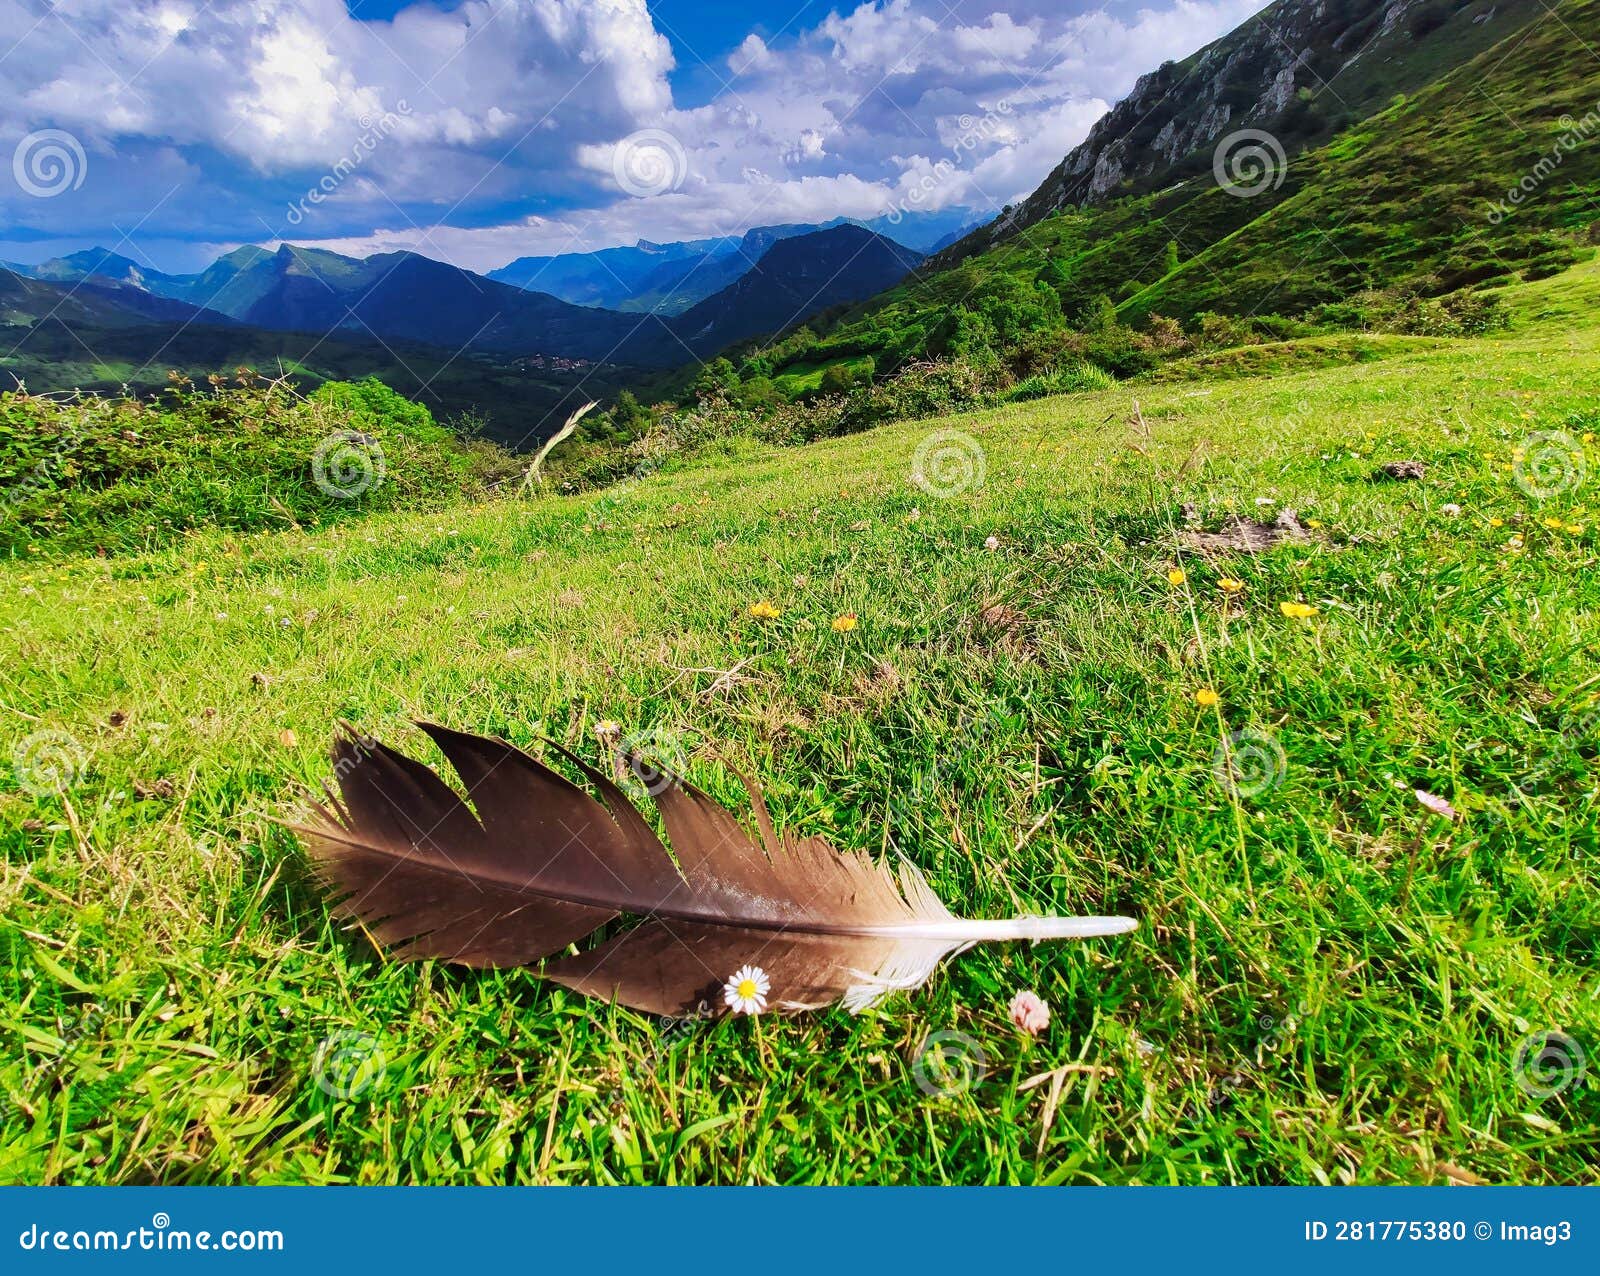 a vulture feather at collada arnivio pass, redes nature park and biosphere reserve, asturias, spain